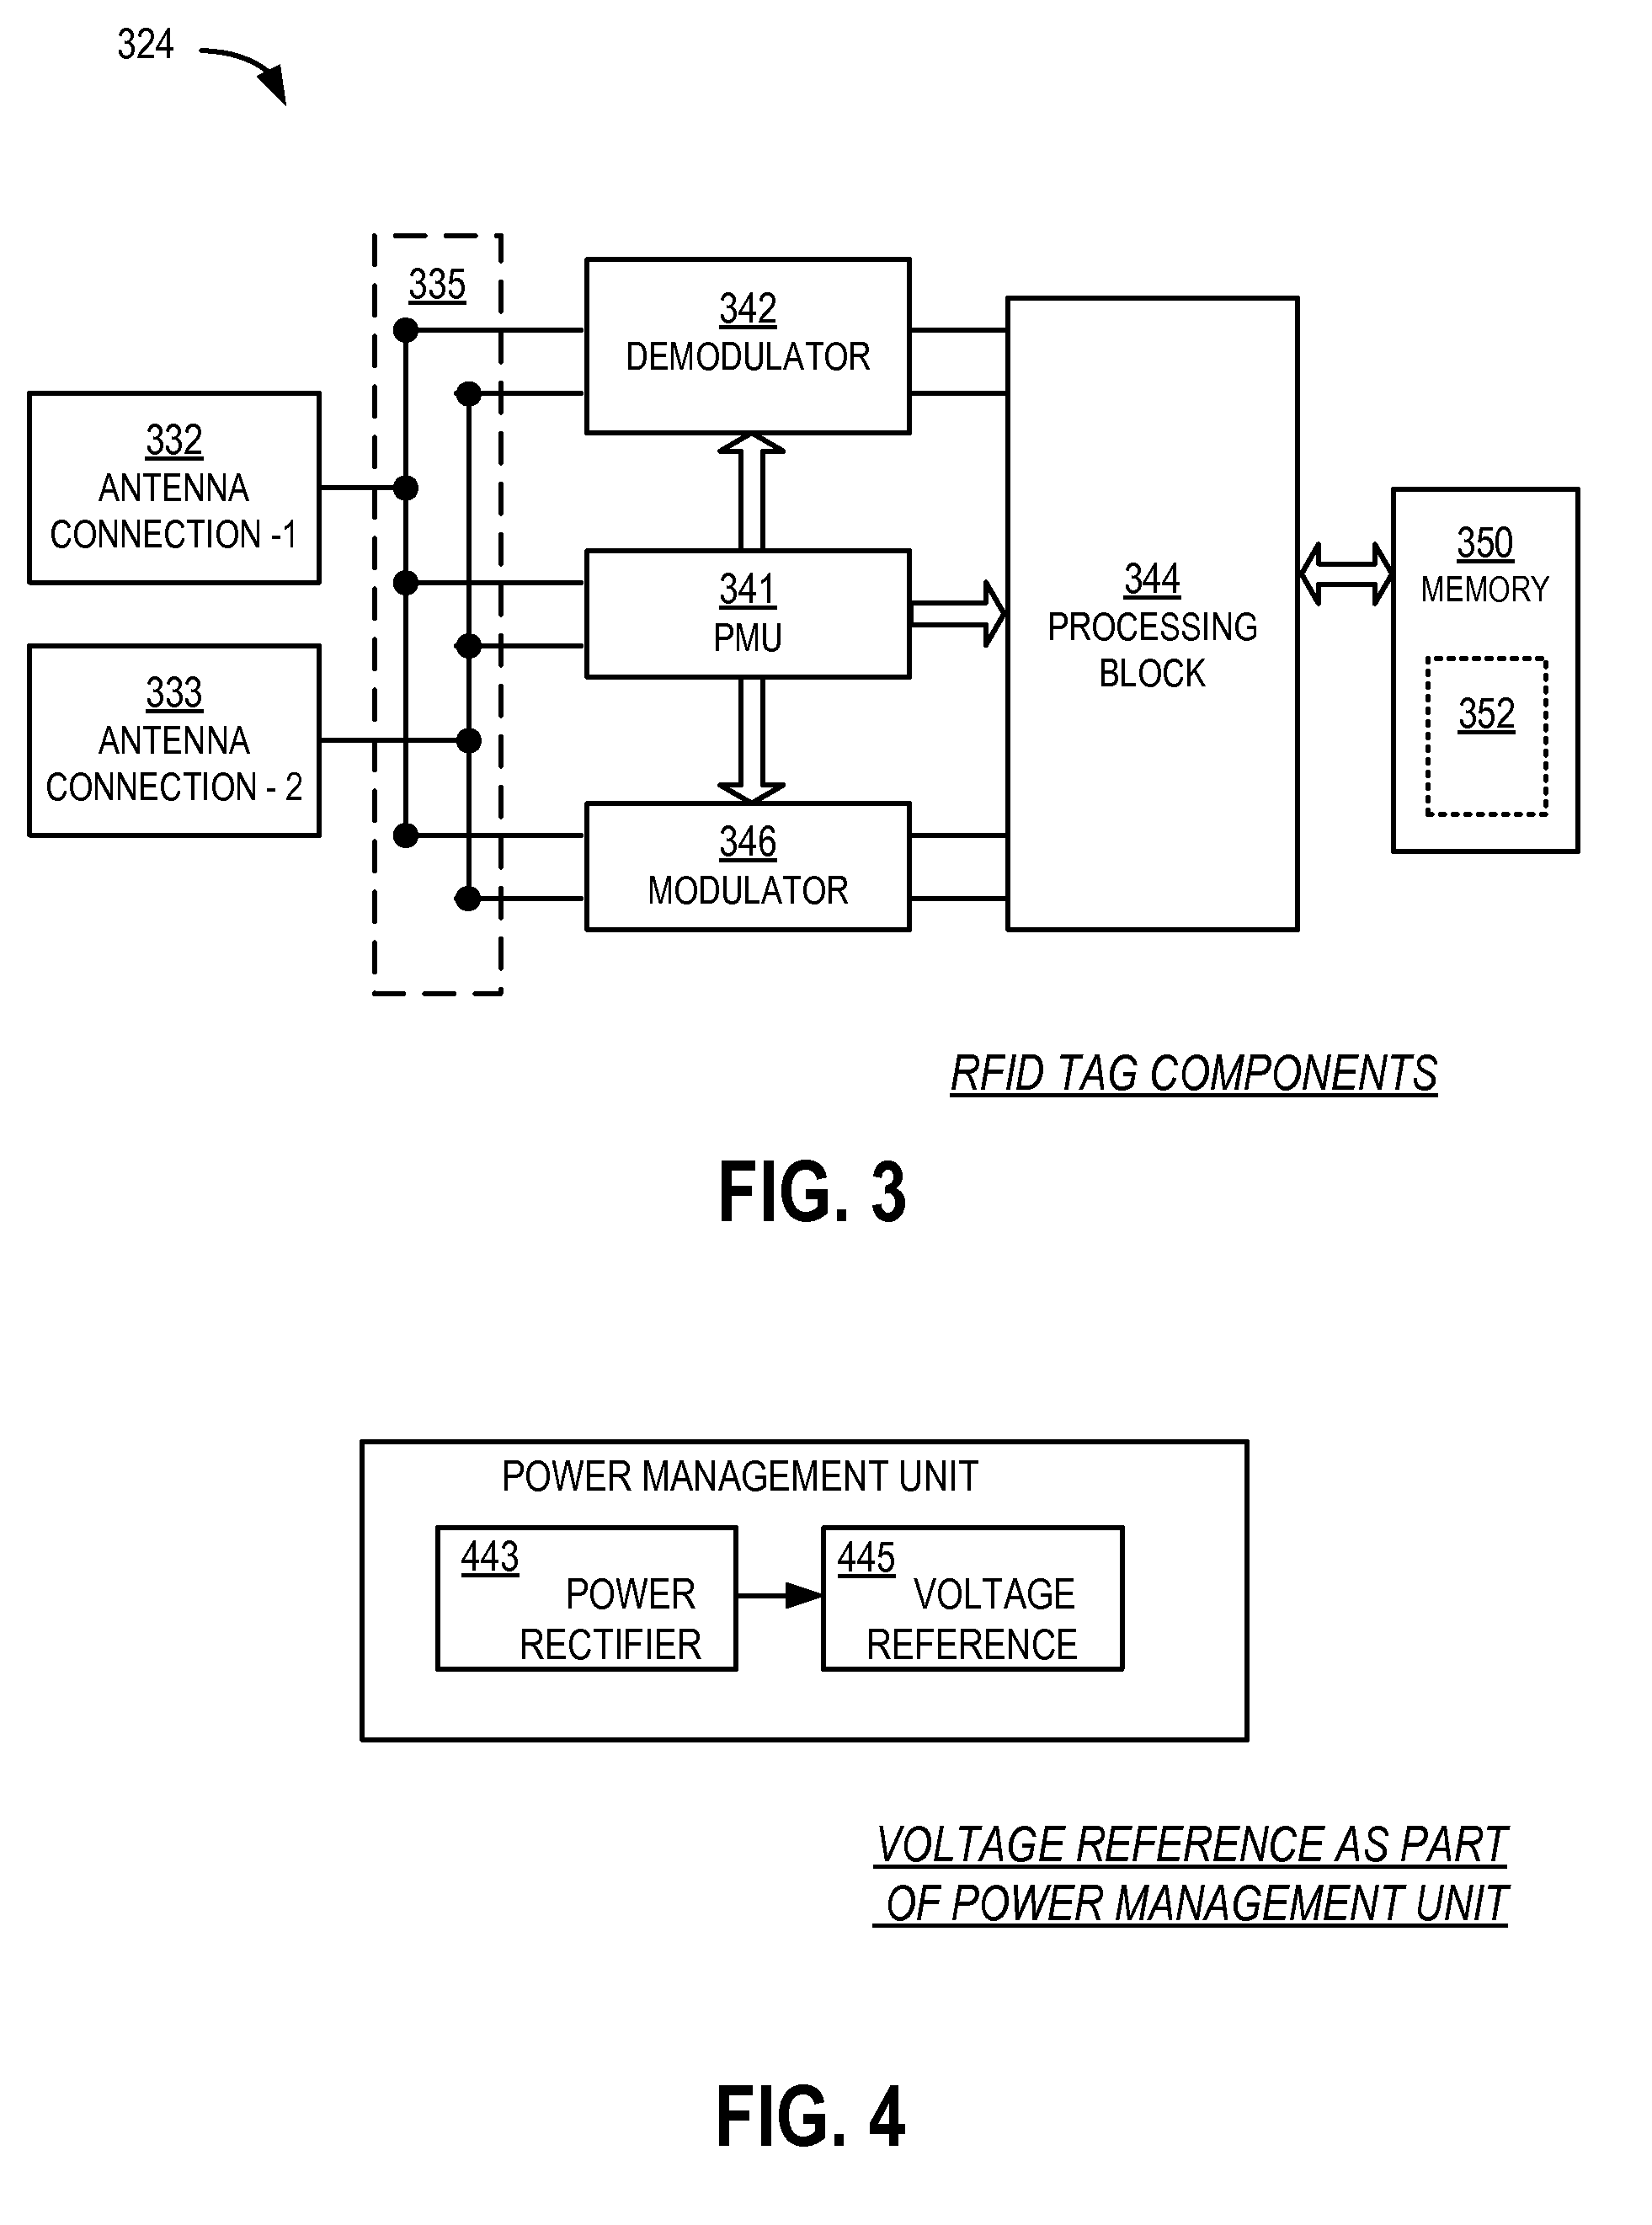 Voltage reference circuit with low-power bandgap